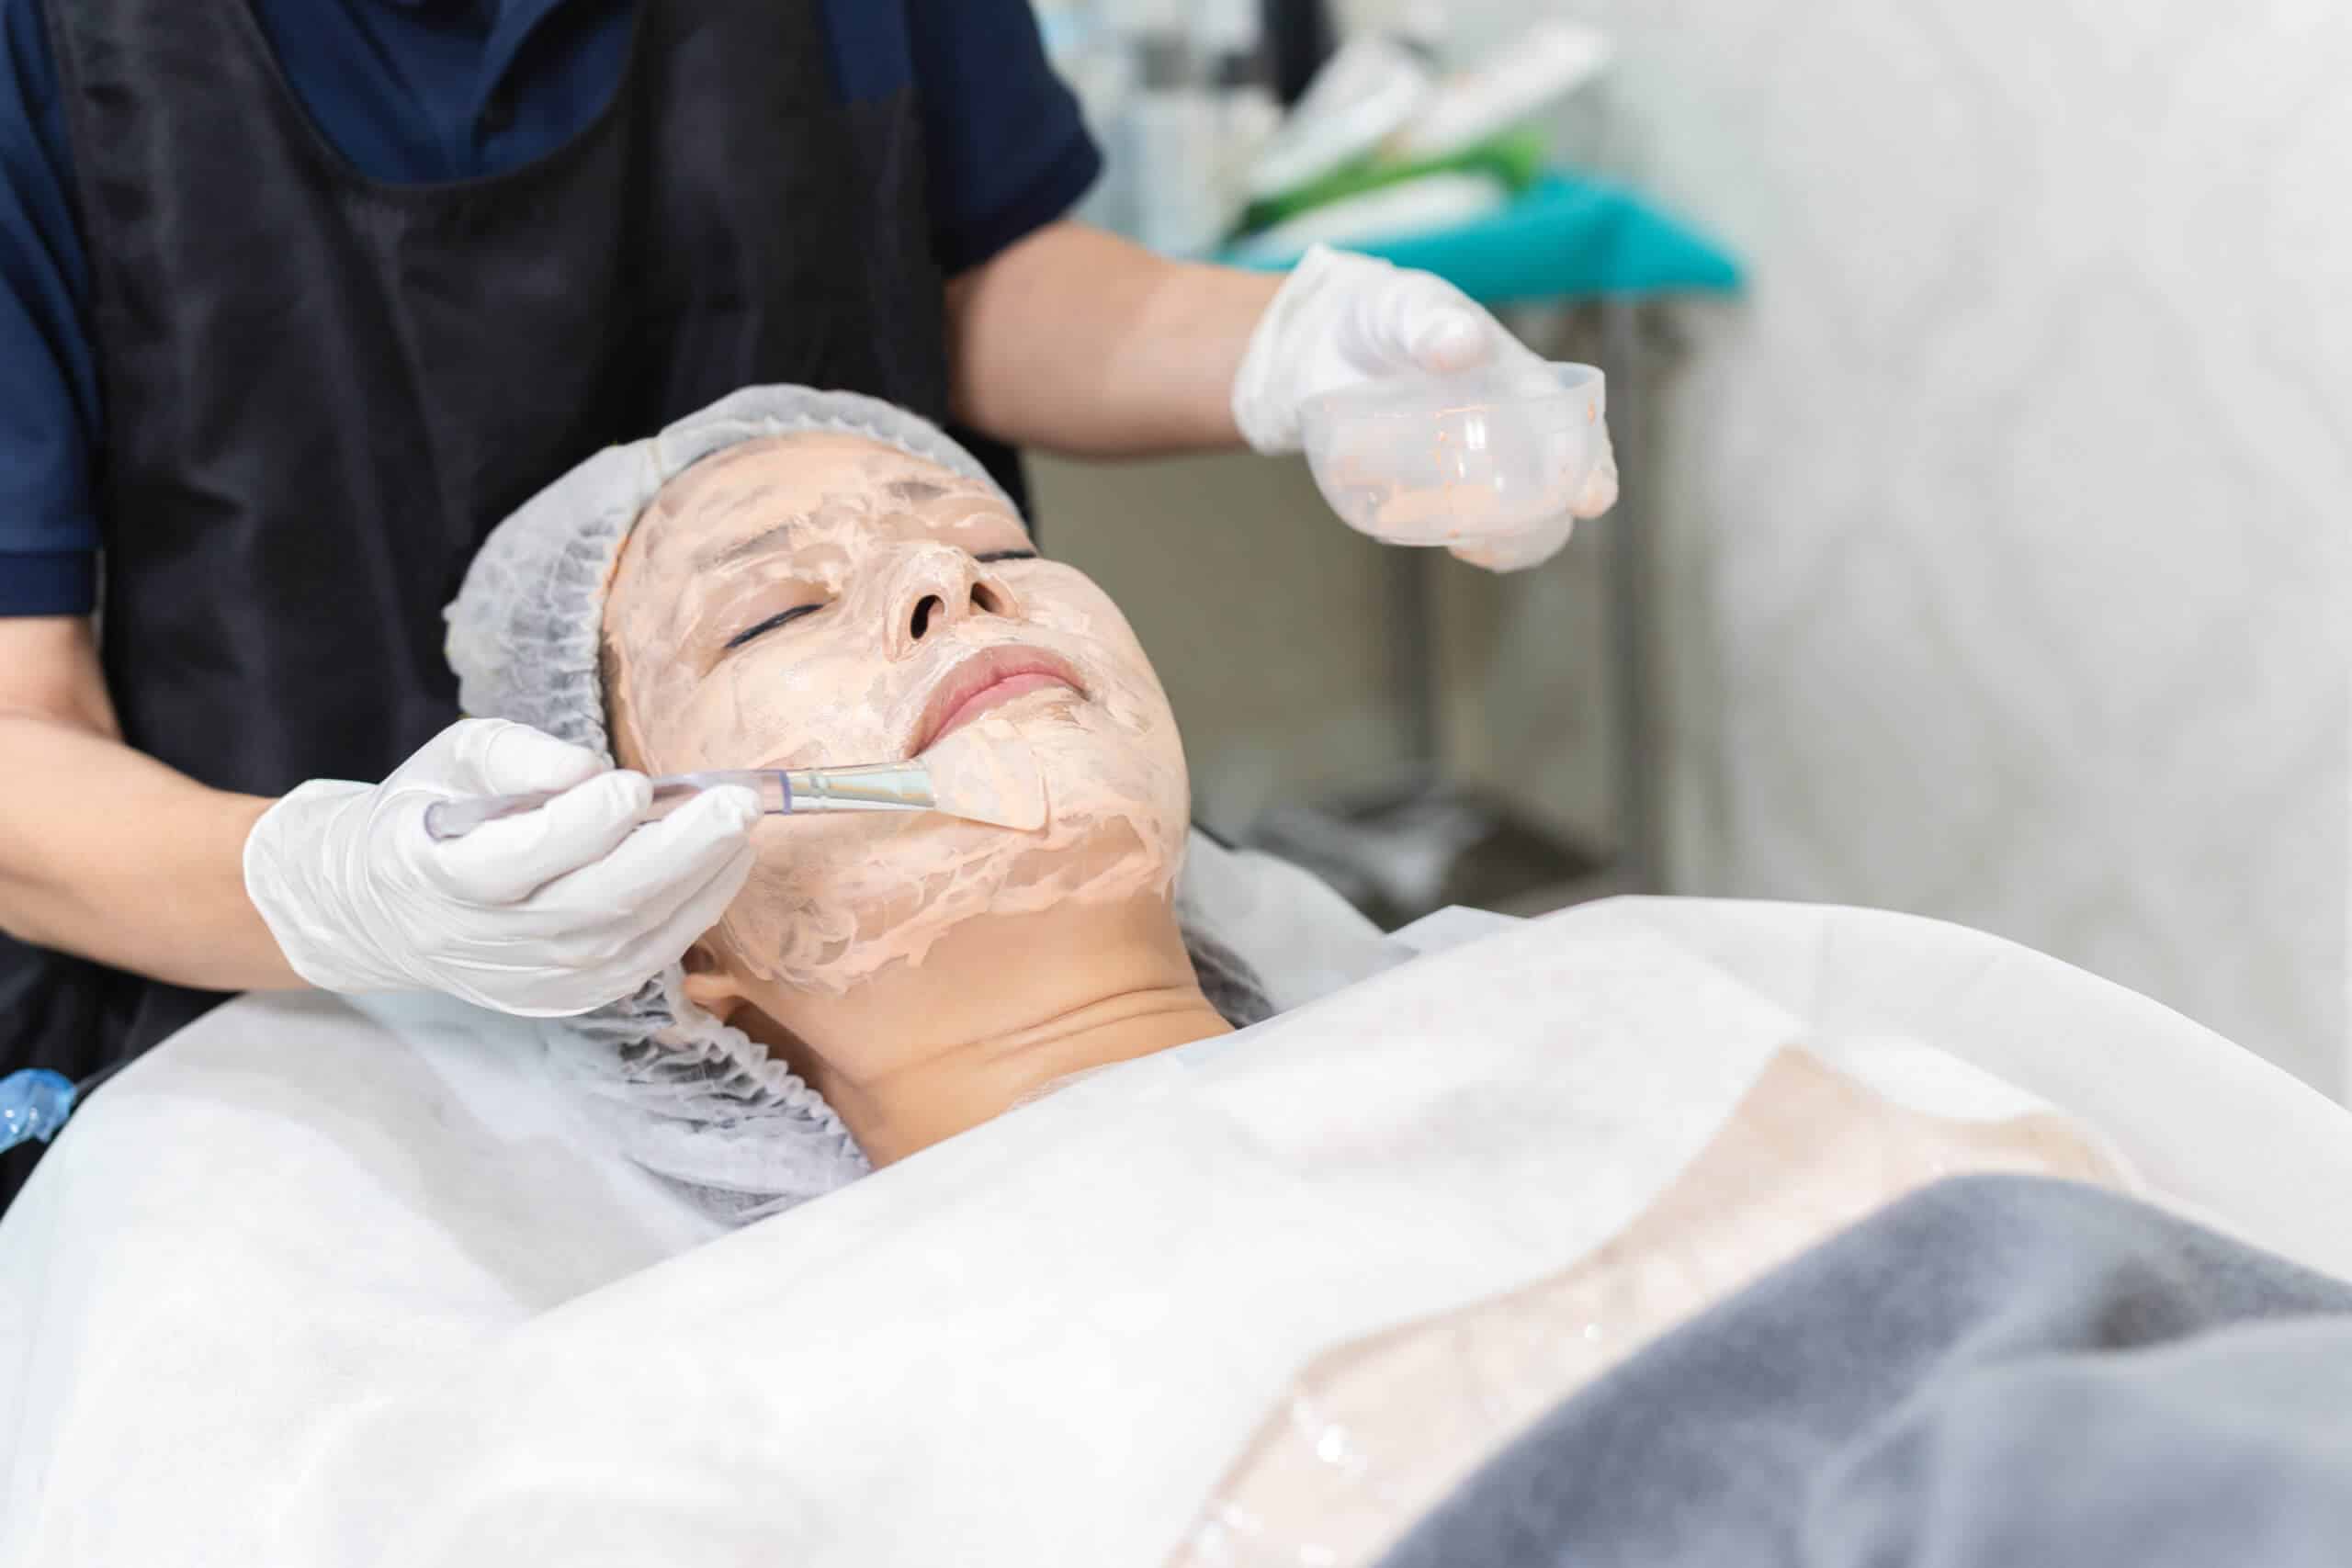 Why is the OxyGeneo Super Facial More Effective than a Standard Facial?